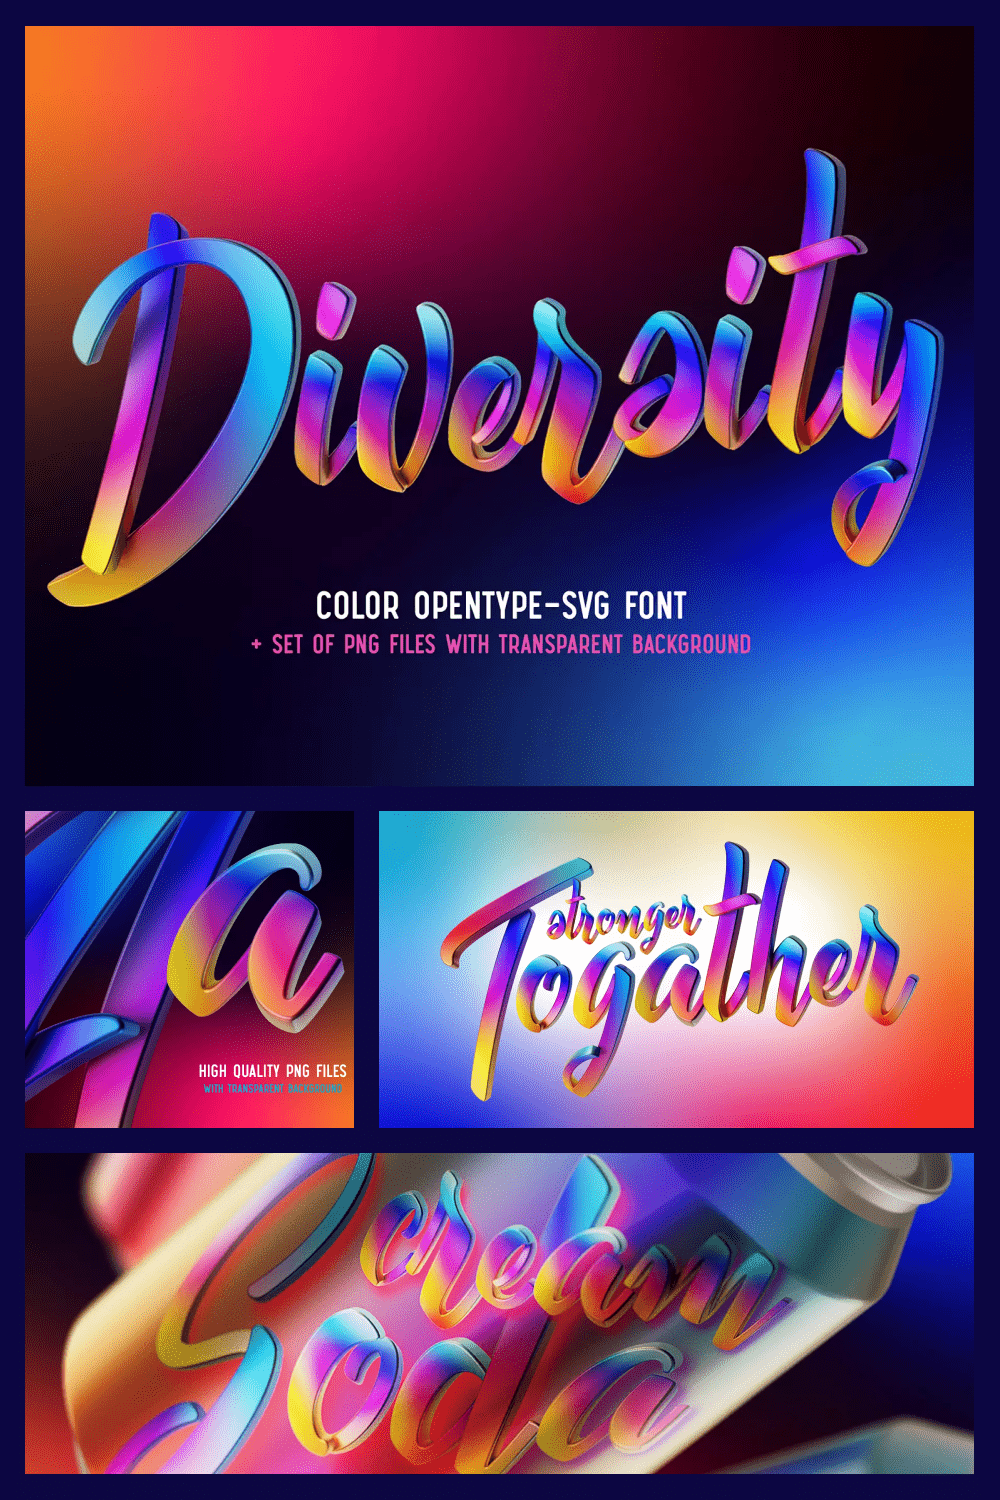 Collage of images with colorful fonts on rainbow backgrounds.